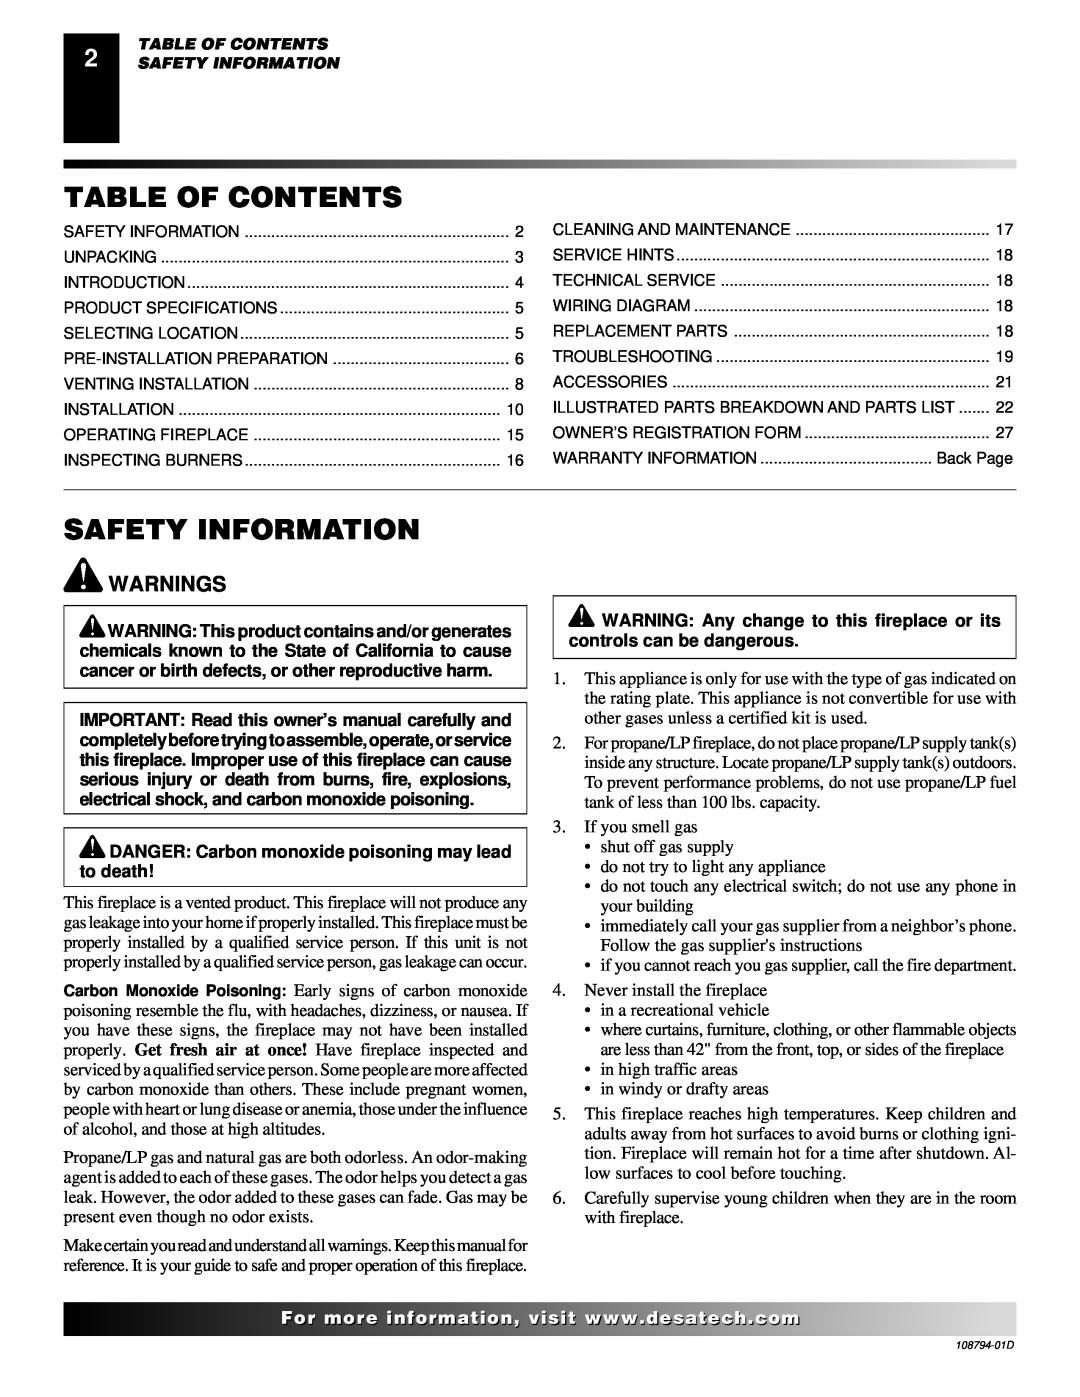 Desa P325E(B) Table Of Contents, Safety Information, Warnings, DANGER Carbon monoxide poisoning may lead to death 